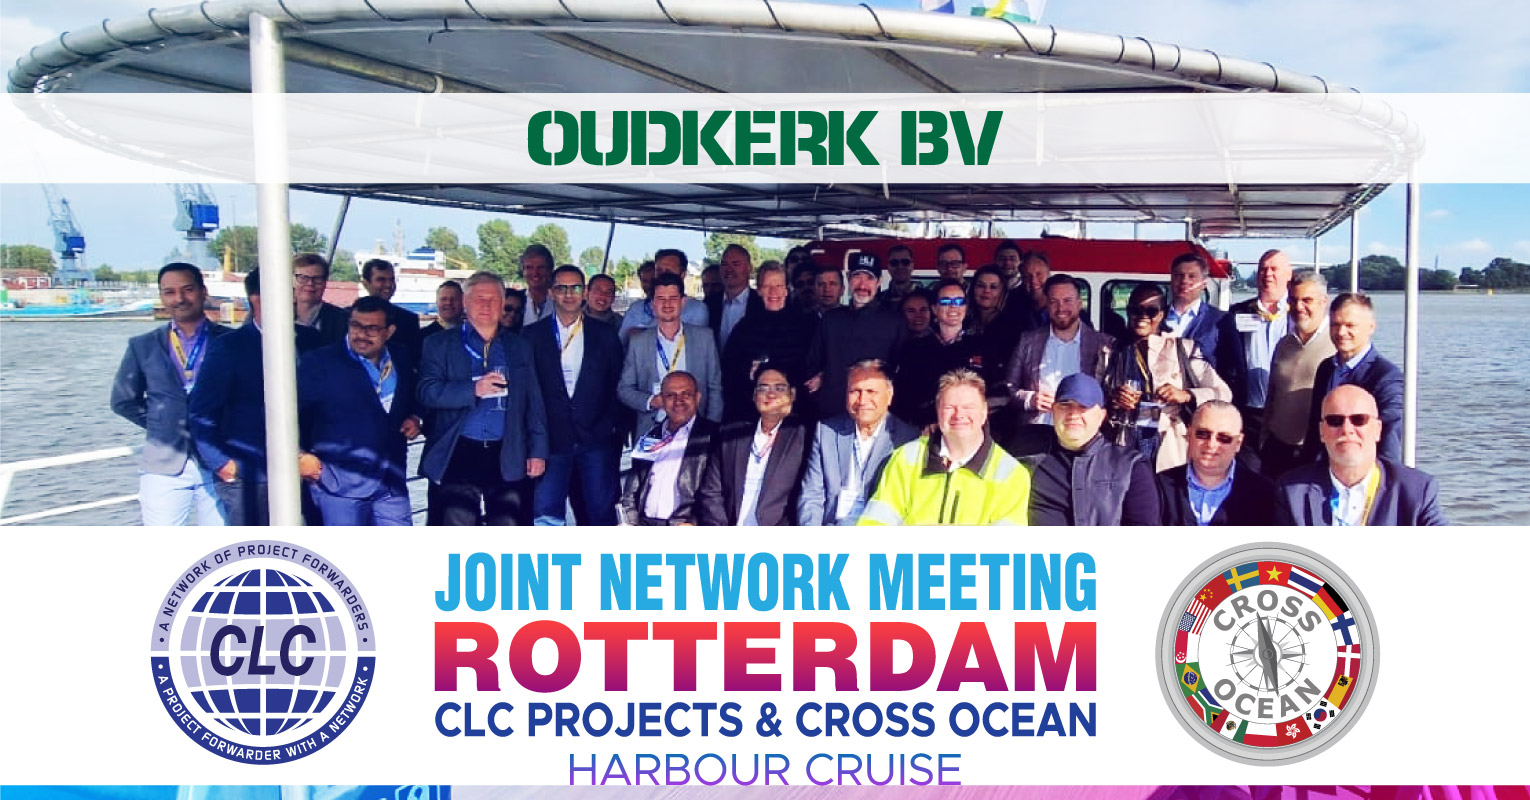 Thank you to Oudkerk B.V. for arranging the nice Rotterdam Harbour Cruise following our Joint Network Meeting with members of Cross Ocean and CLC Projects Networks!